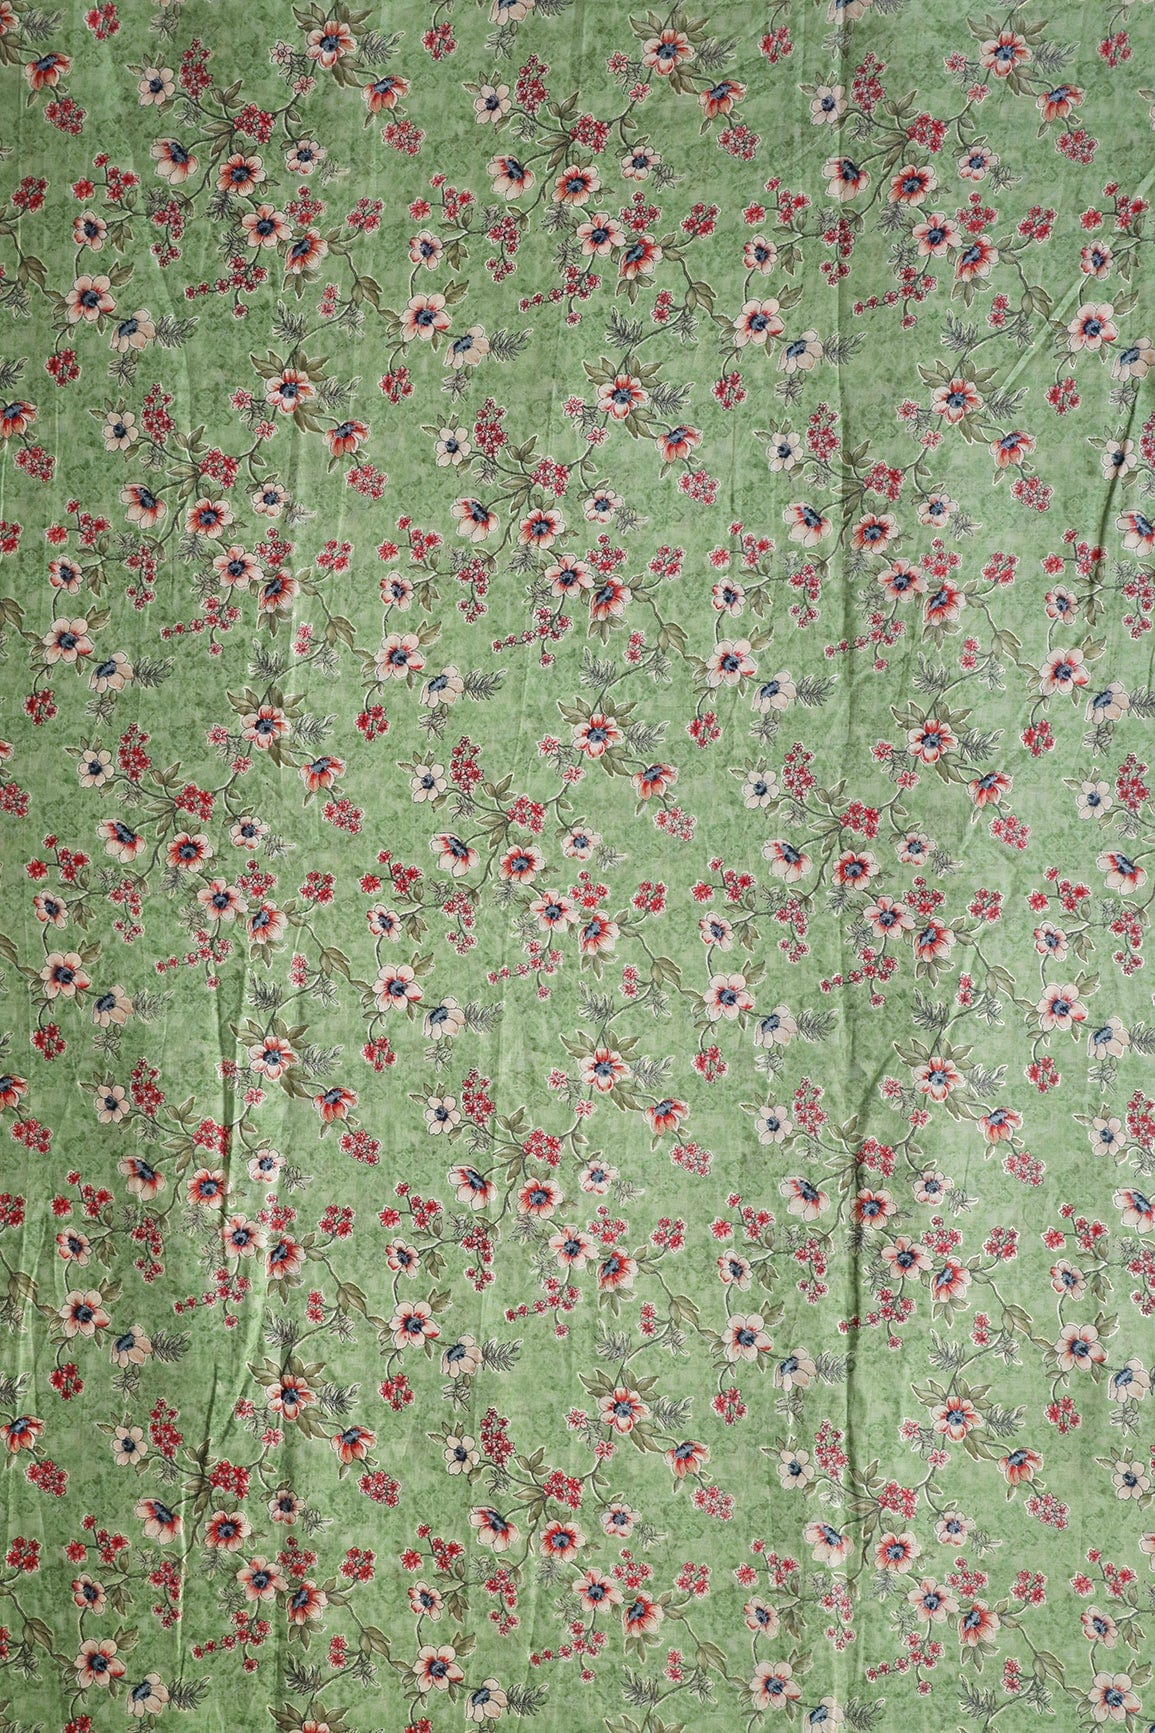 doeraa Prints Mint Green And Beige Color Floral Foil Print On Pure Mul Cotton Fabric